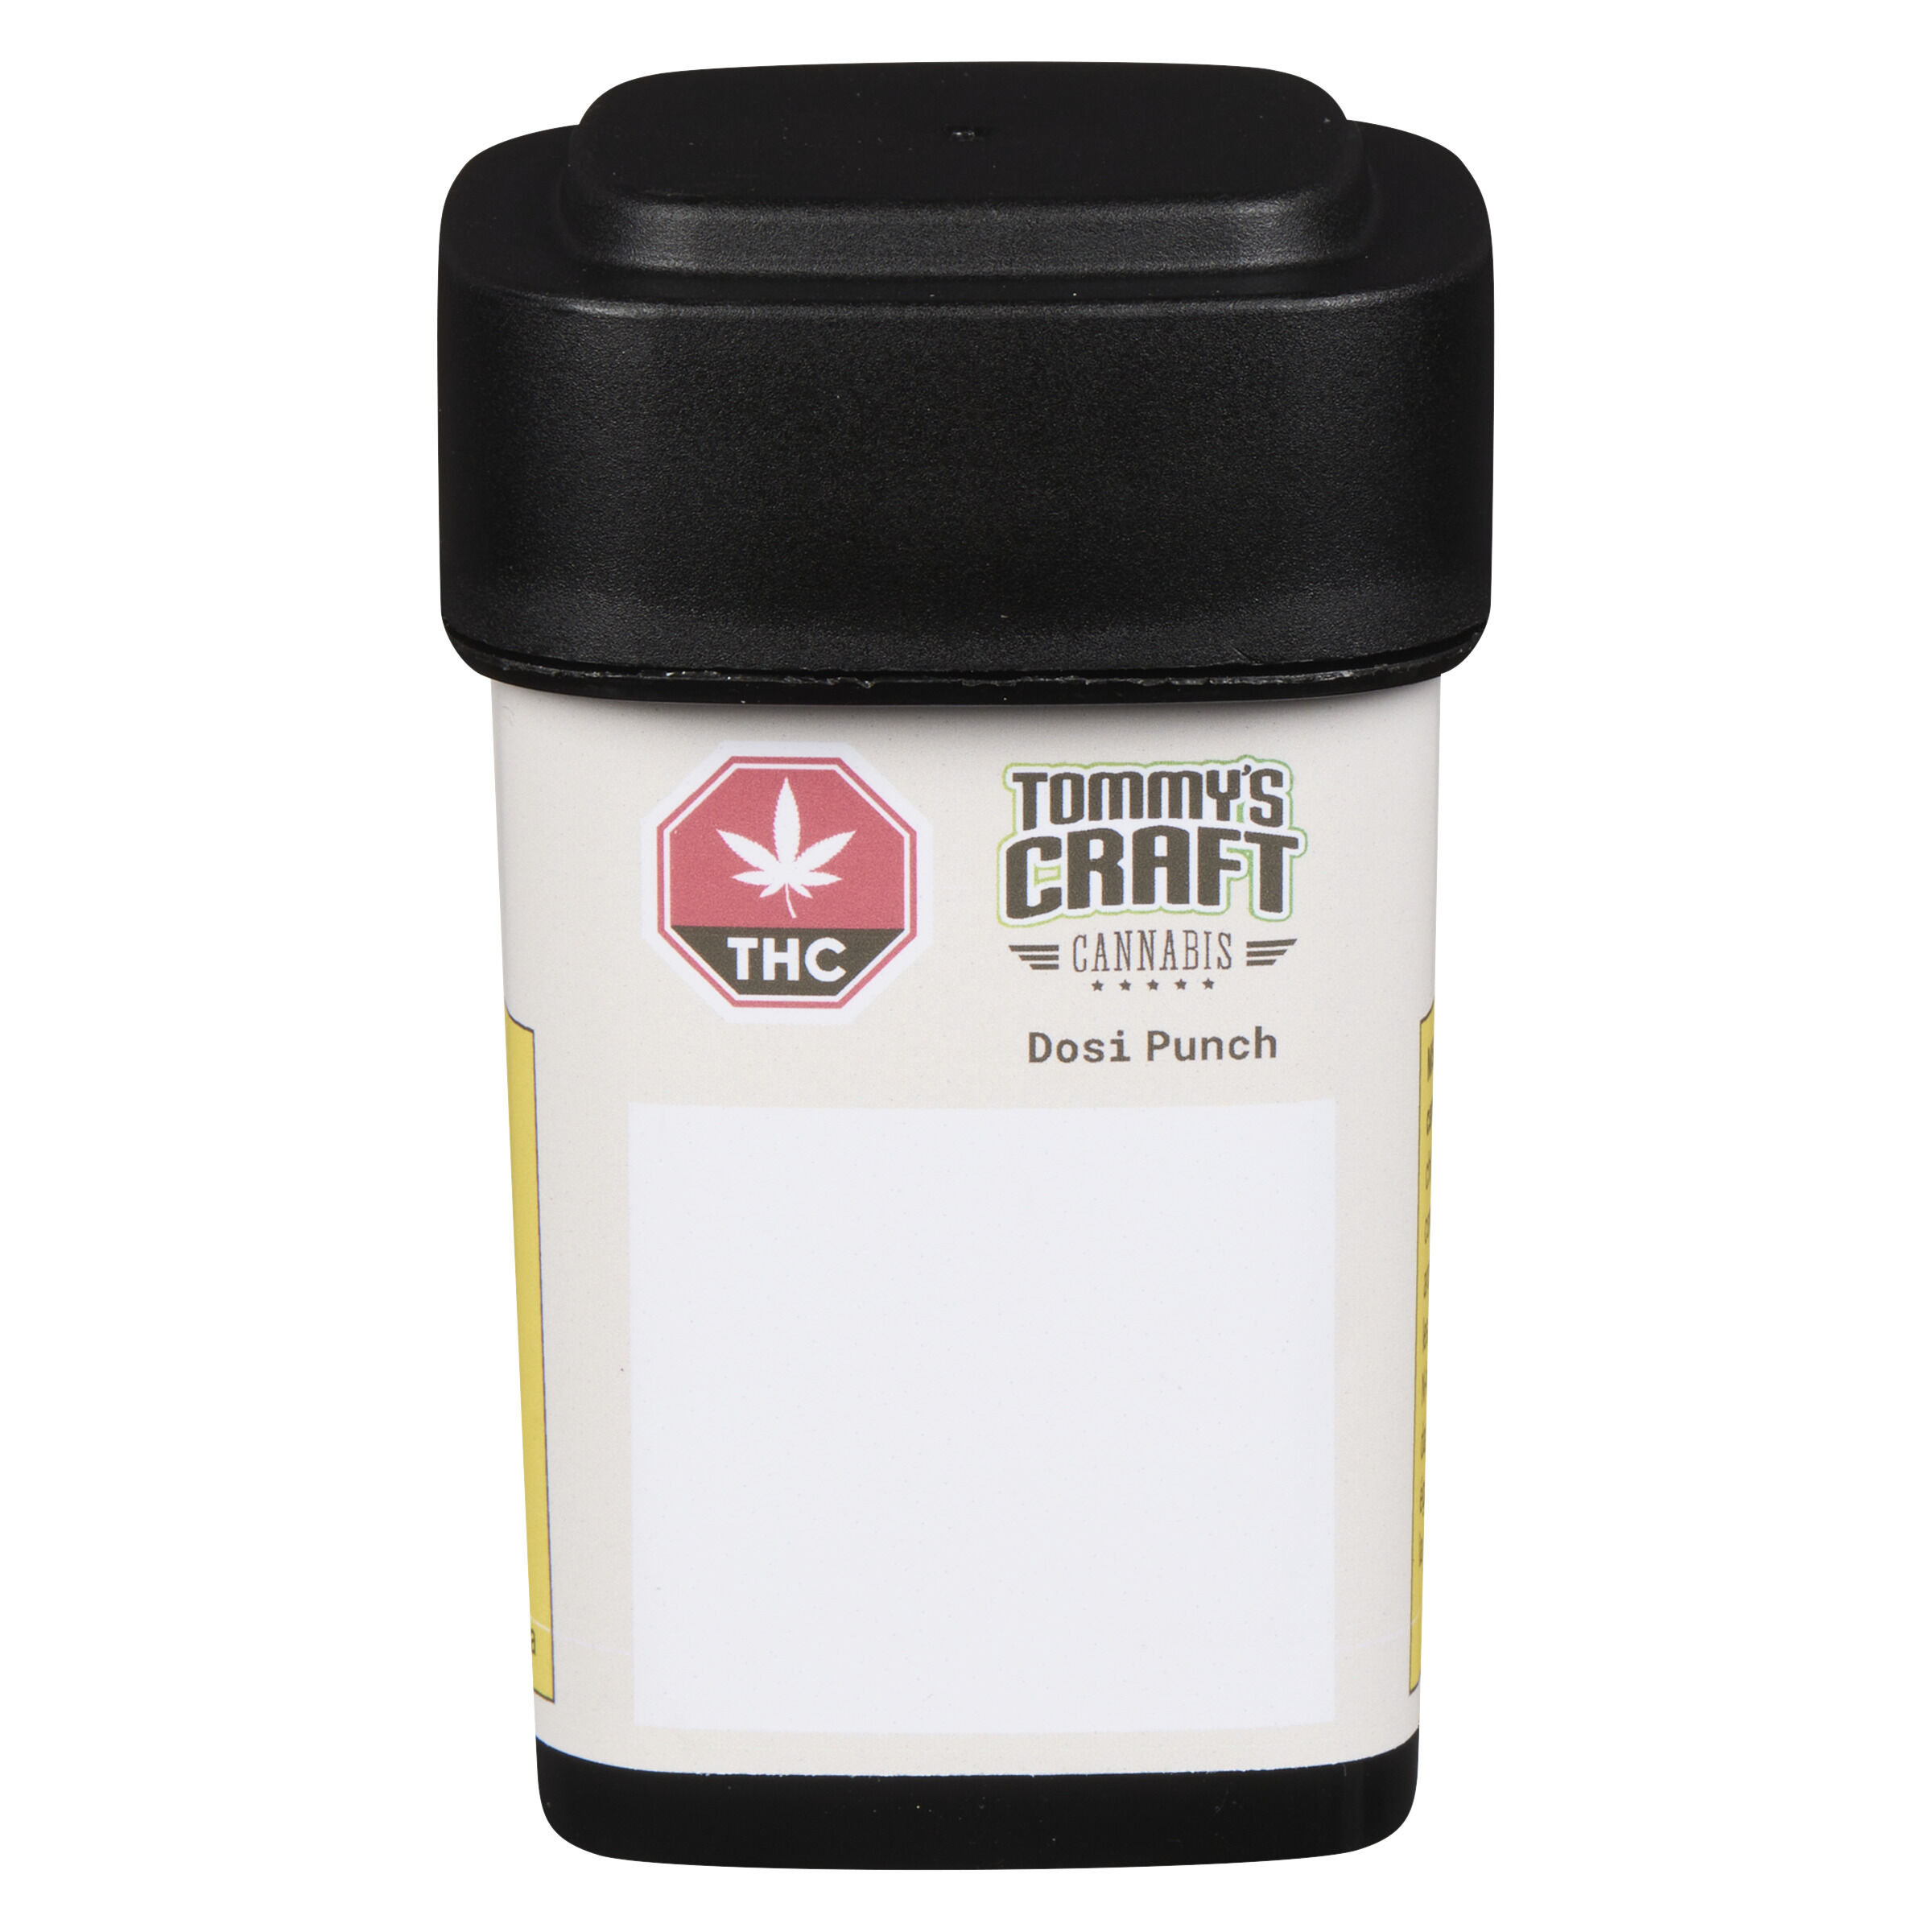 Tommy's Craft Cannabis - Tommy's Dosi Punch Pre-Rolls - Indica - 10x0.35g